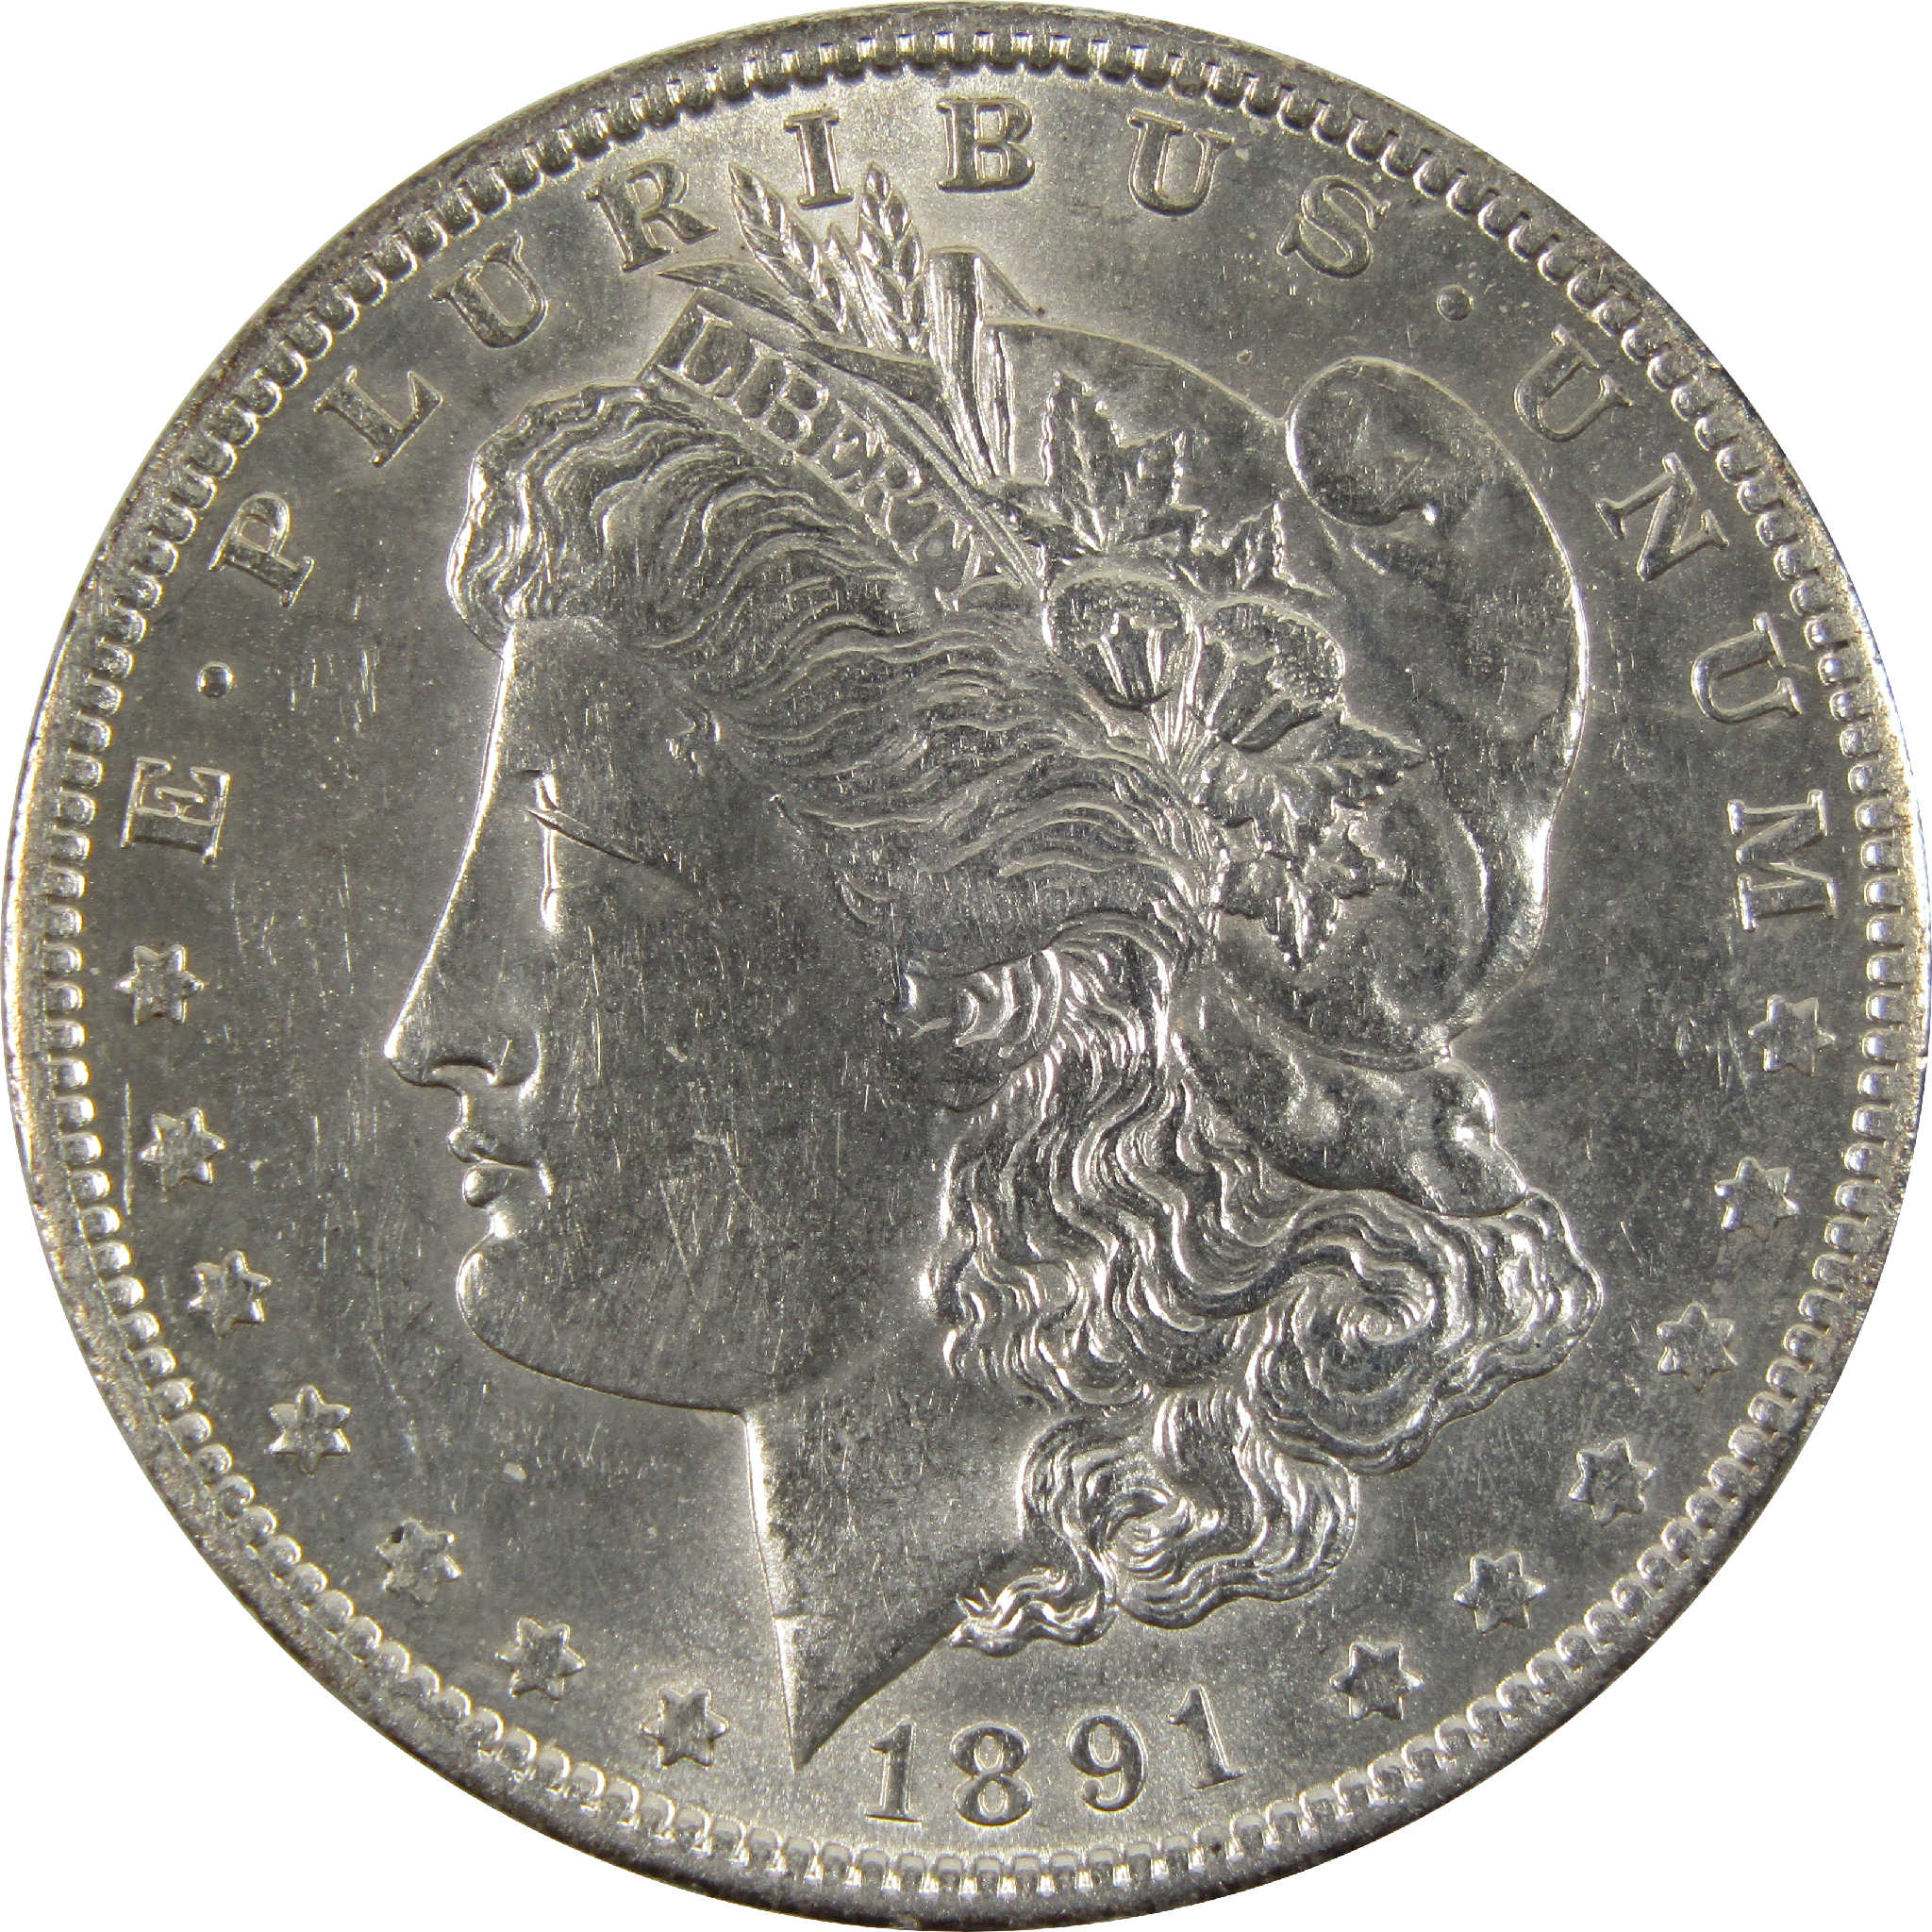 1891 O Morgan Dollar AU About Uncirculated 90% Silver $1 SKU:CPC3784 - Morgan coin - Morgan silver dollar - Morgan silver dollar for sale - Profile Coins &amp; Collectibles